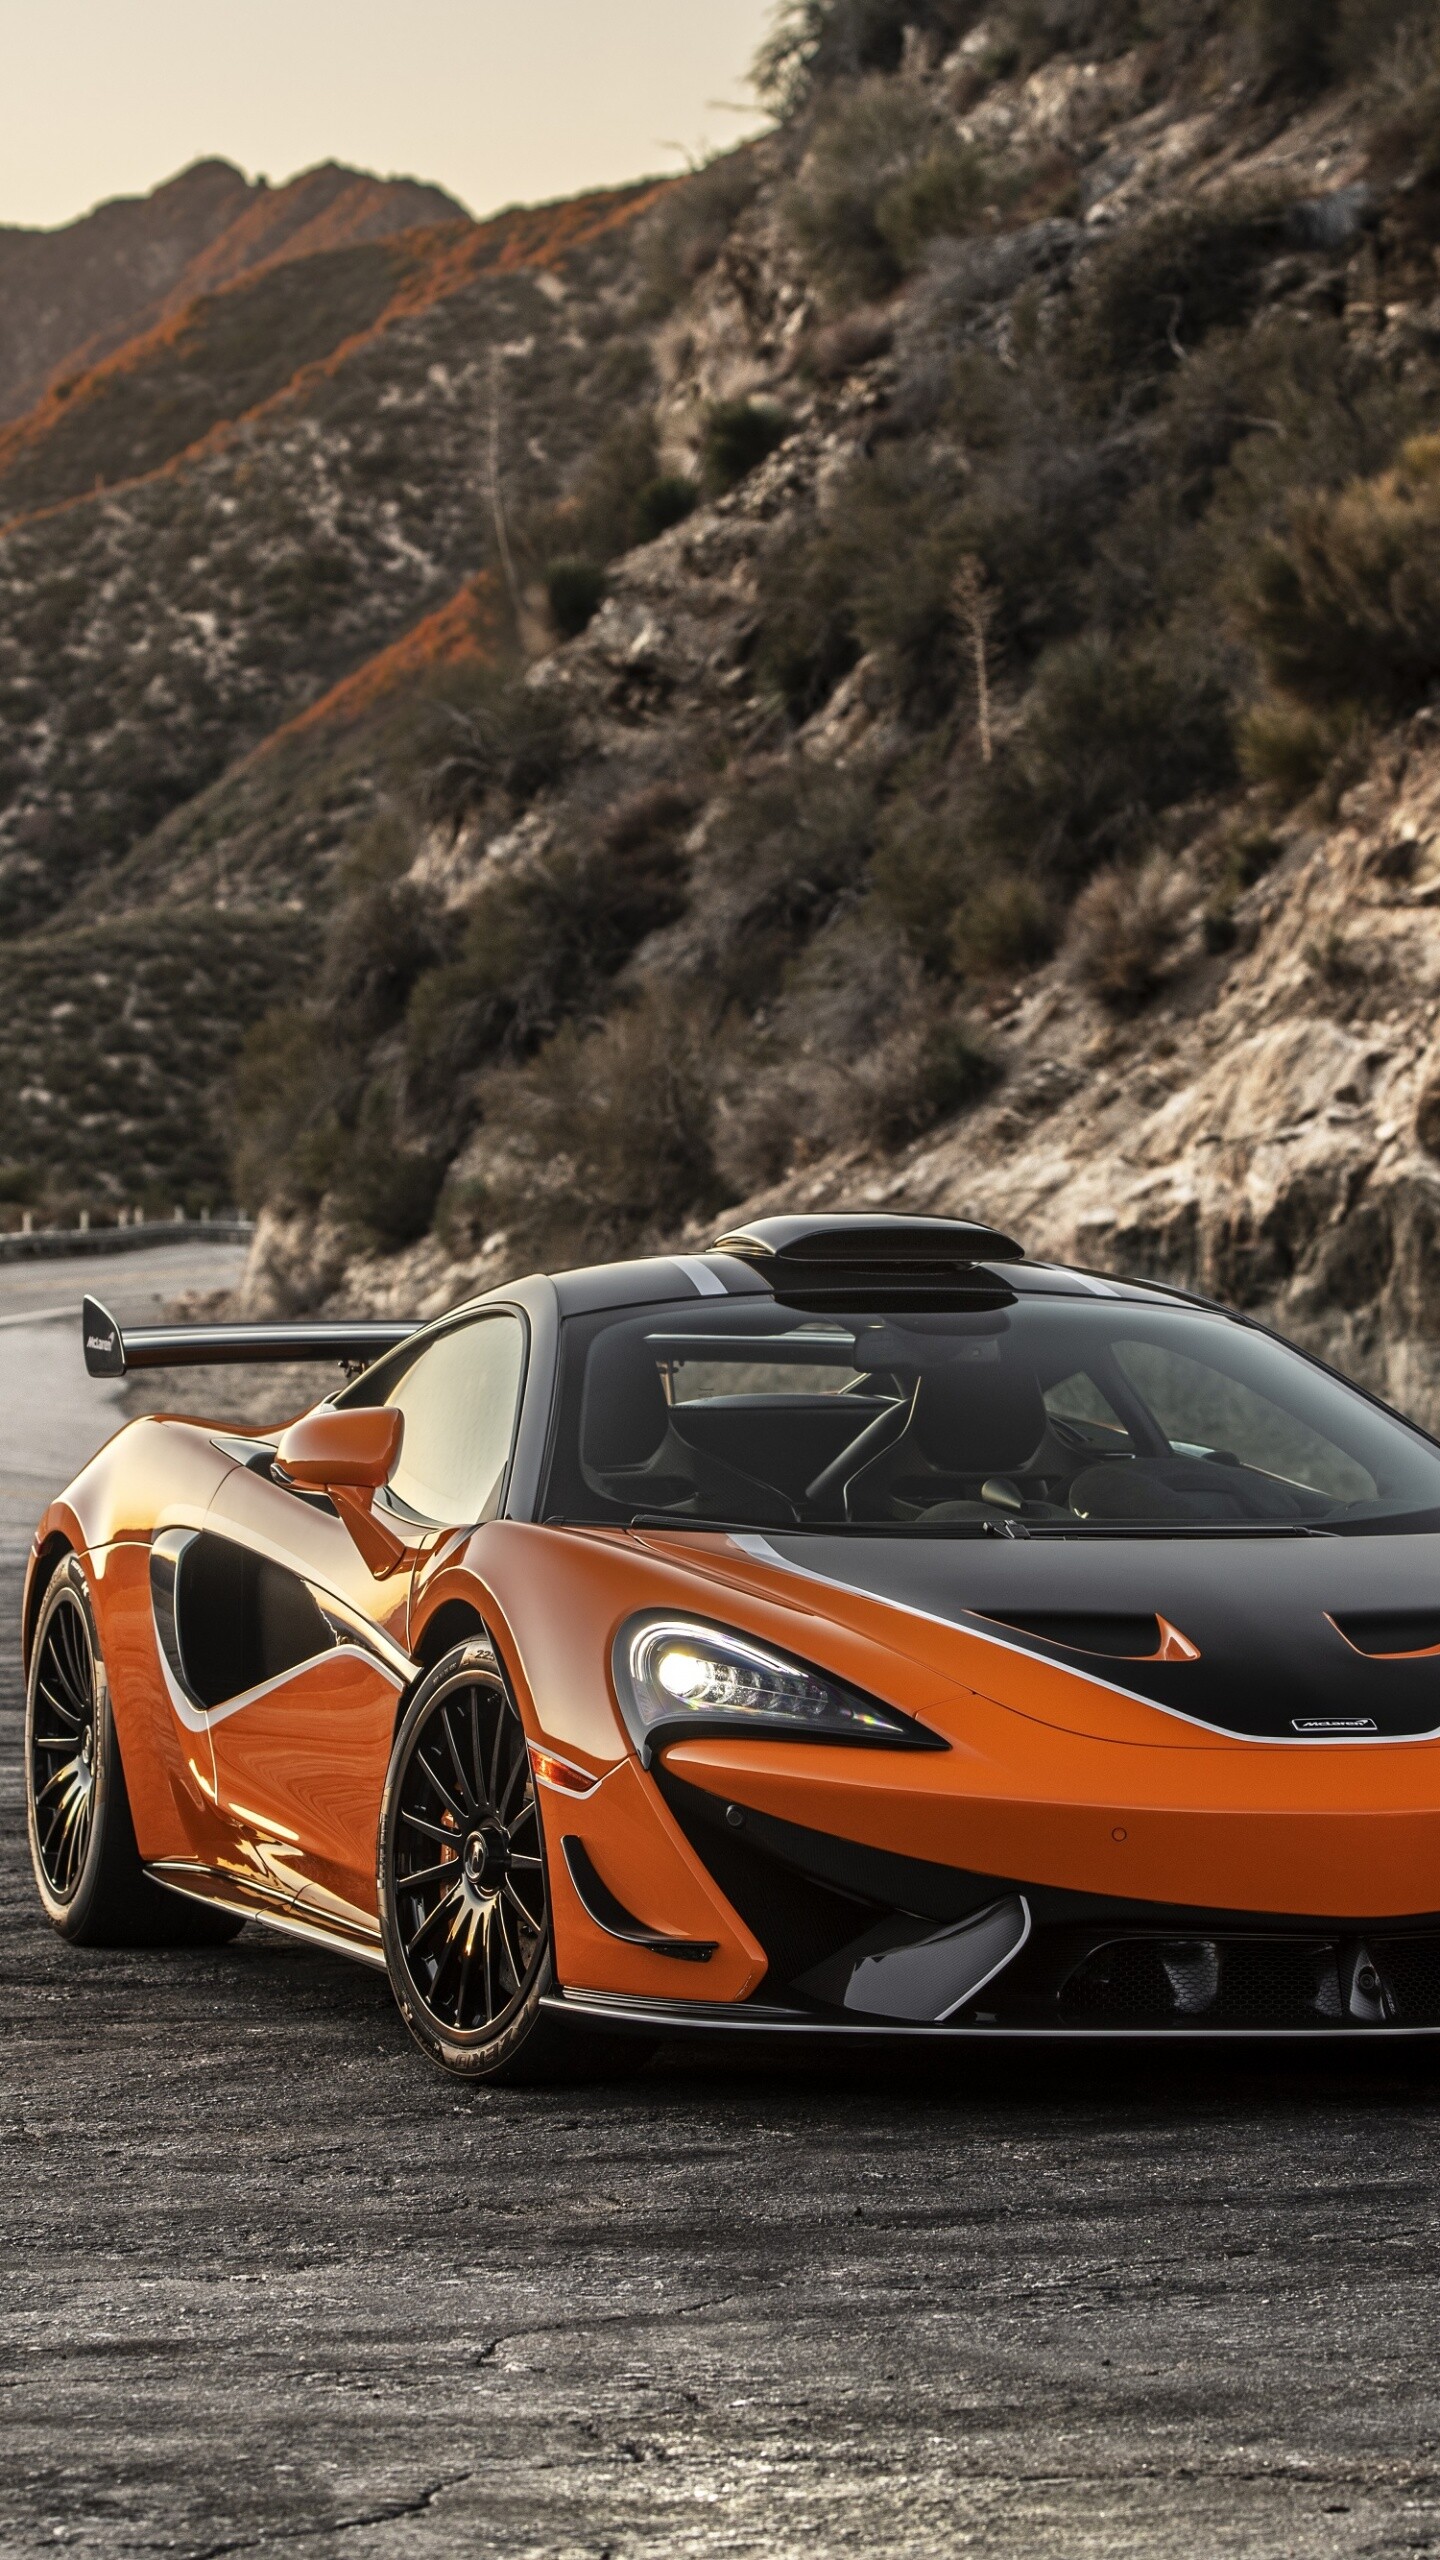 McLaren: 620R, Powered by a 3.8-liter twin-turbo V8 that produces 610 hp. 1440x2560 HD Wallpaper.